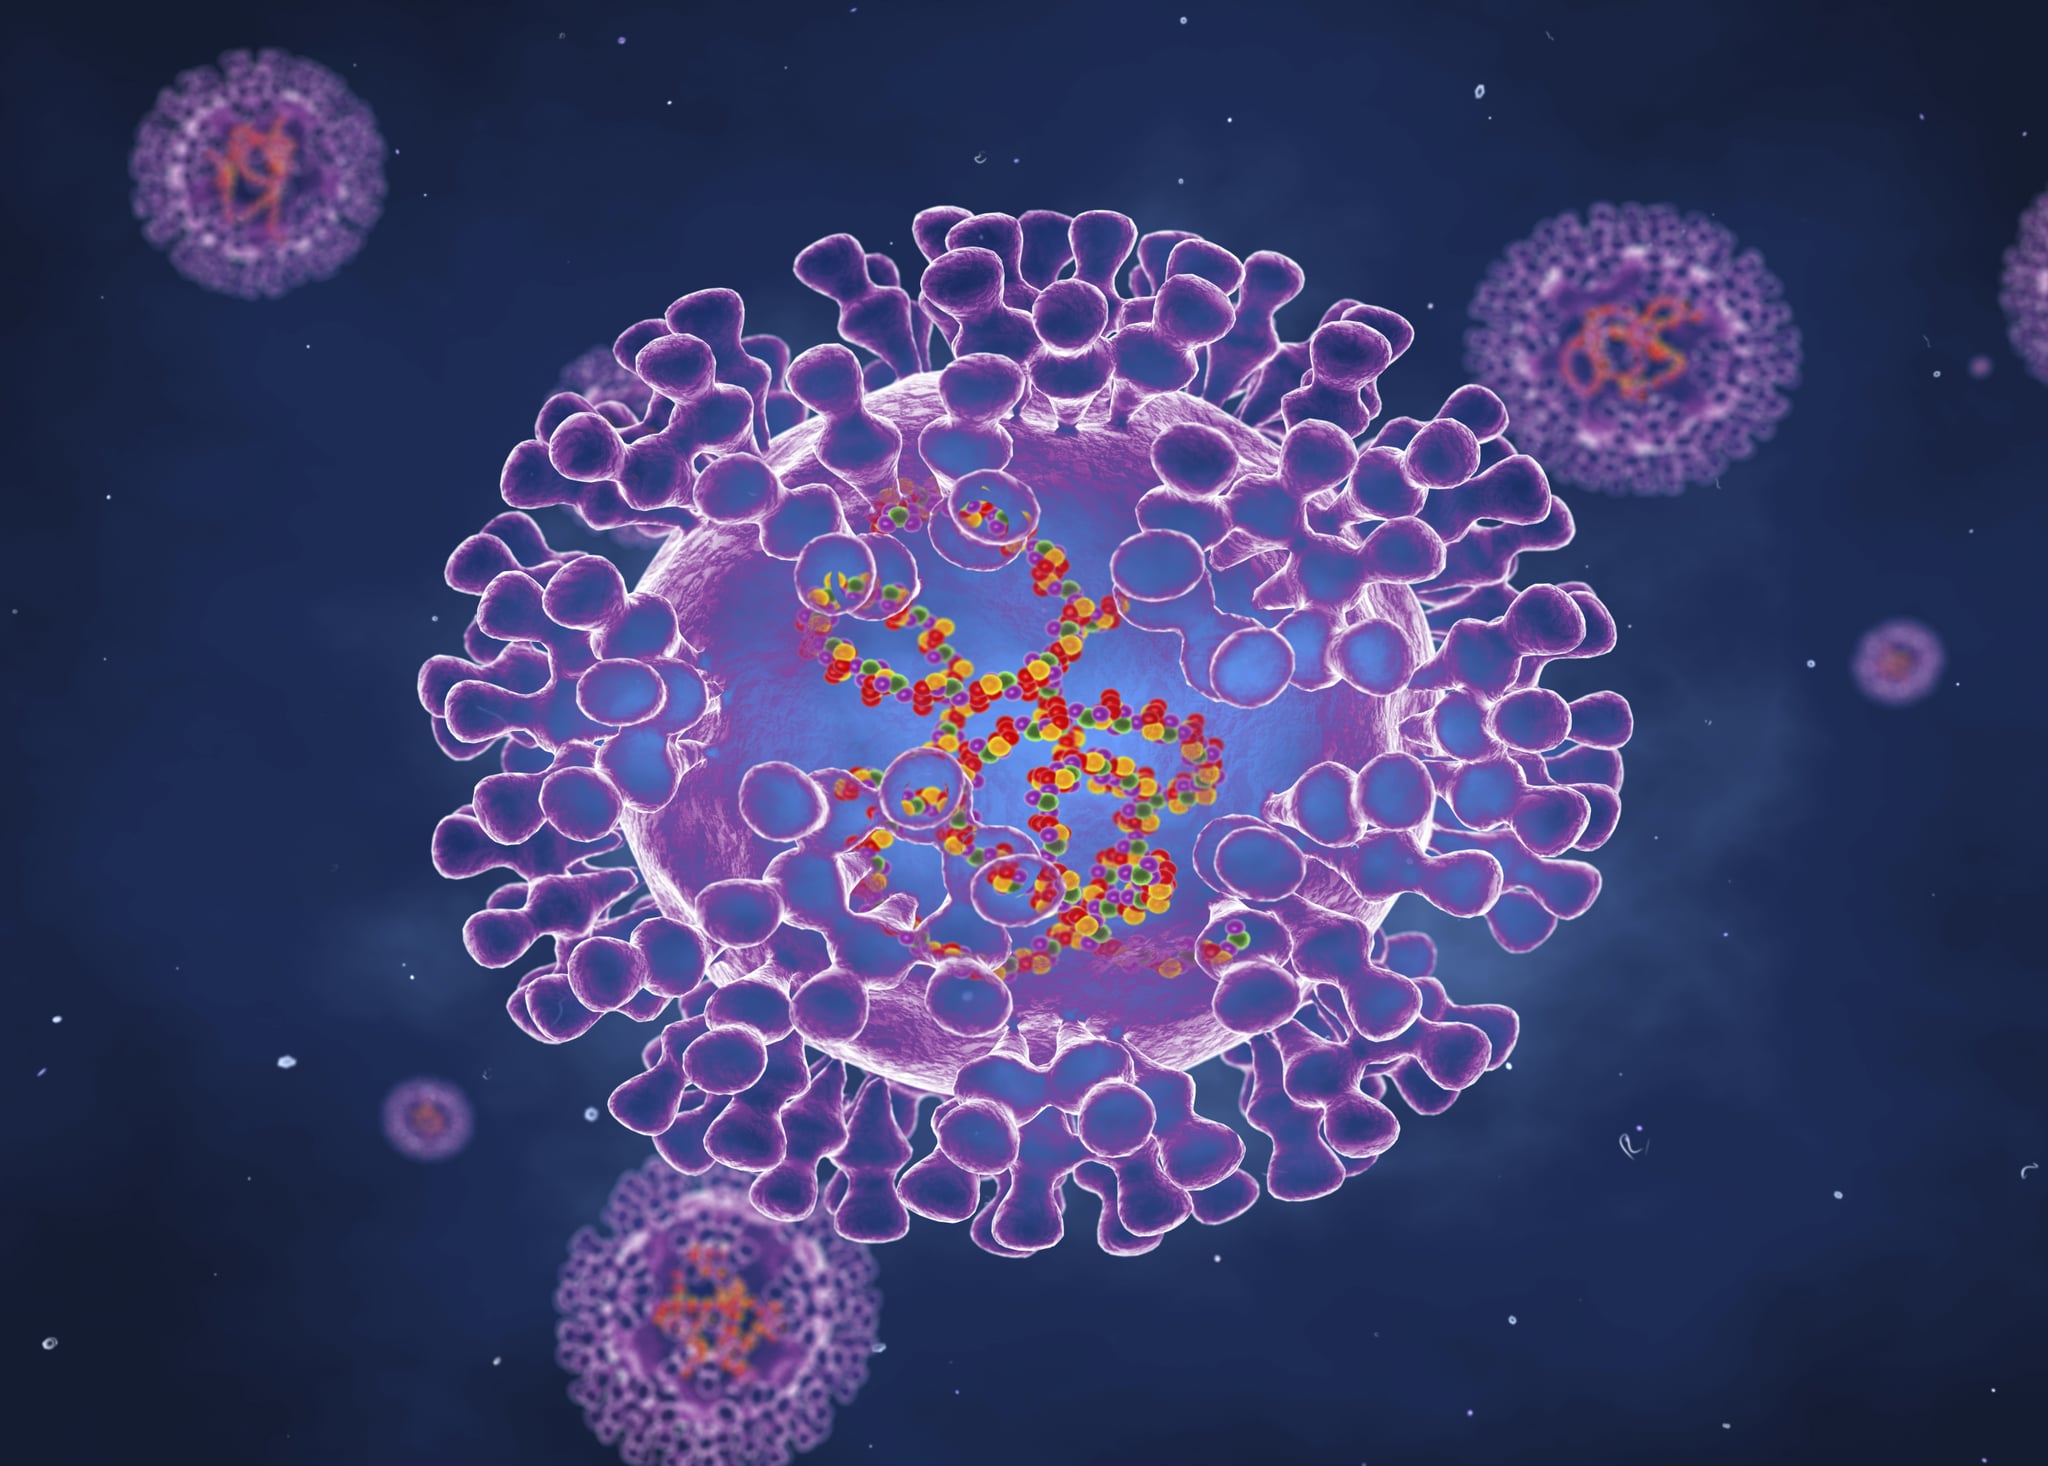 Pox virus, illustration. Pox viruses are oval shaped and have double-strand DNA. There are many types of Pox virus including Chickenpox, Monkeypox and Smallpox. Smallpox was eradicated in the 1970's. Infection occurs because of contact with contaminated animals or people and results in a rash or small bumps on the skin.